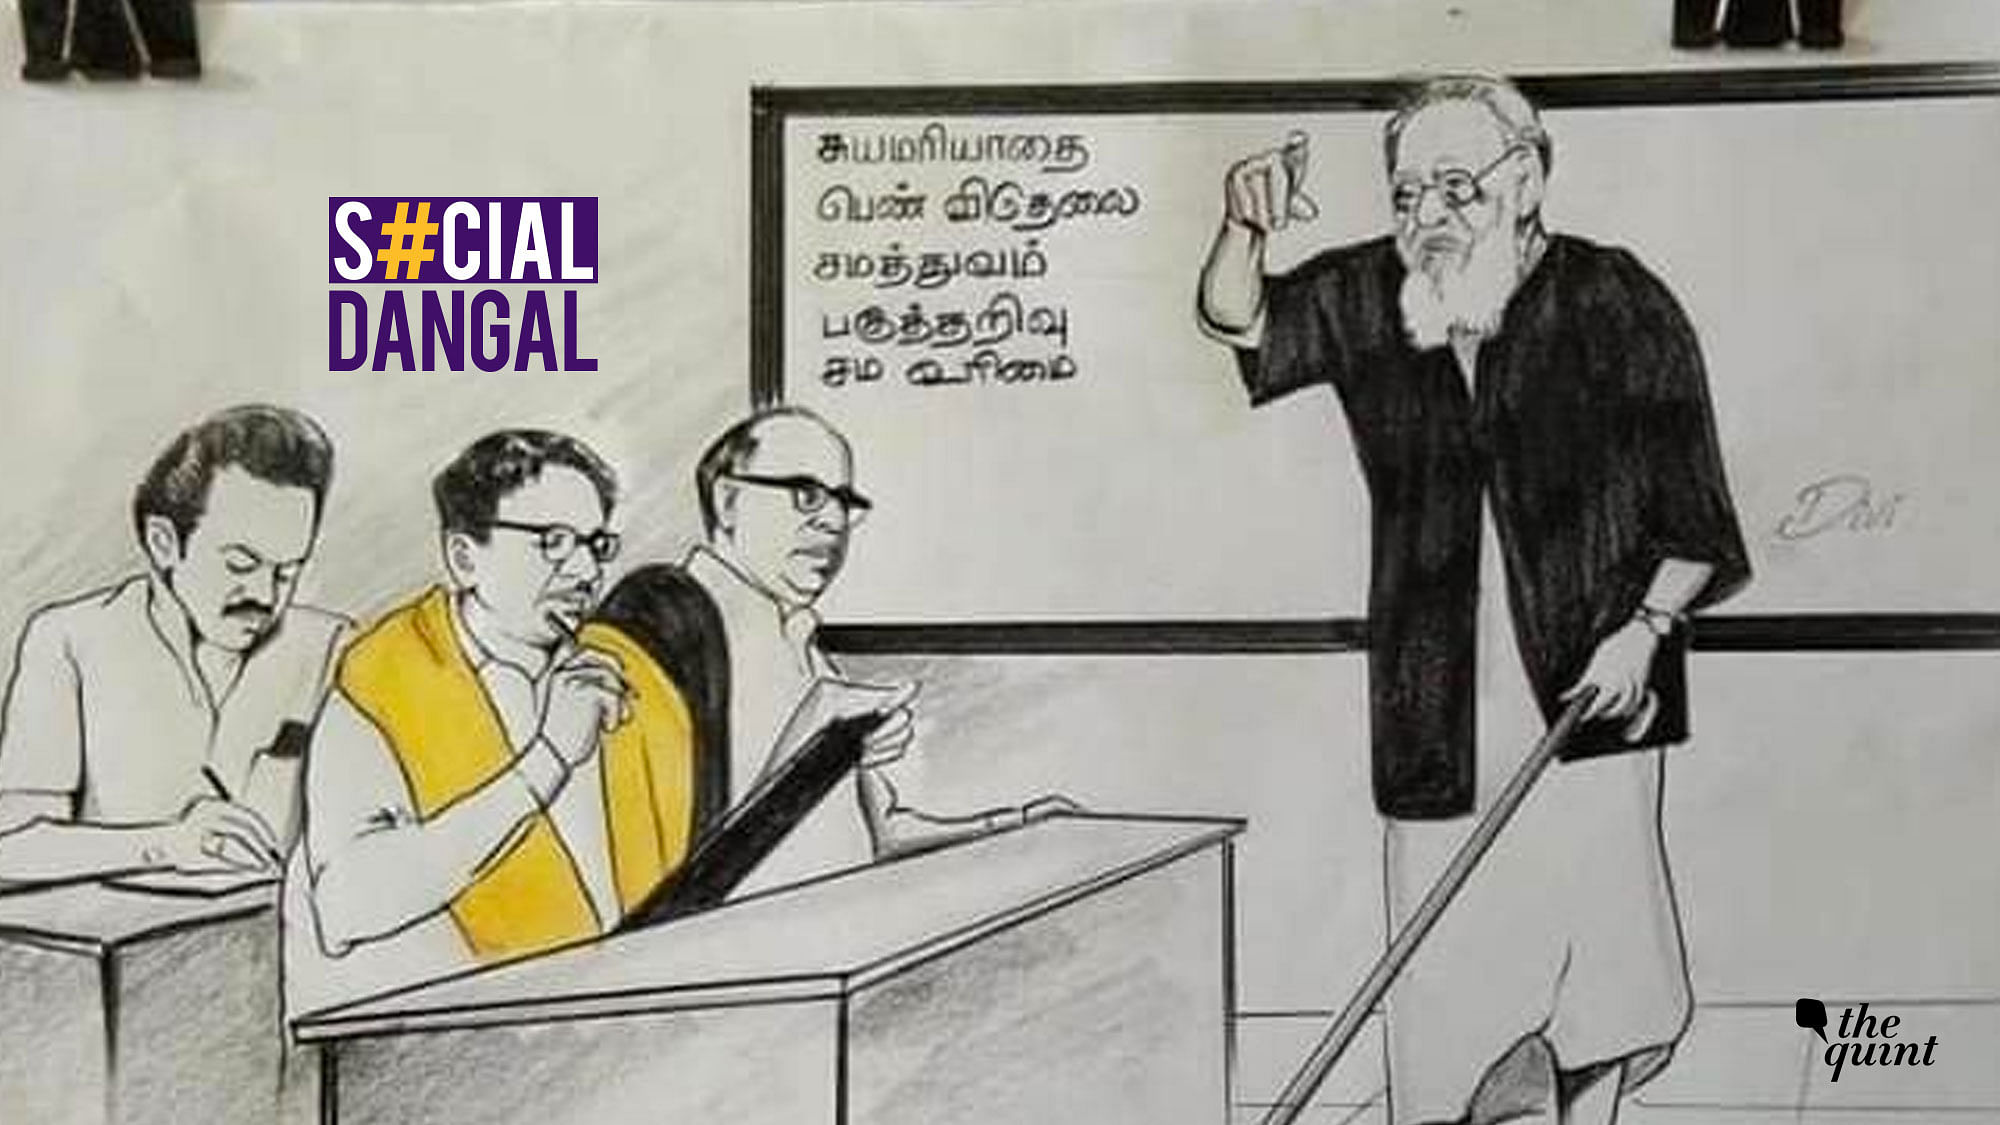 MPs also chanted ‘Long Live Periyar’ along with ‘Long Live Tamil’.&nbsp;